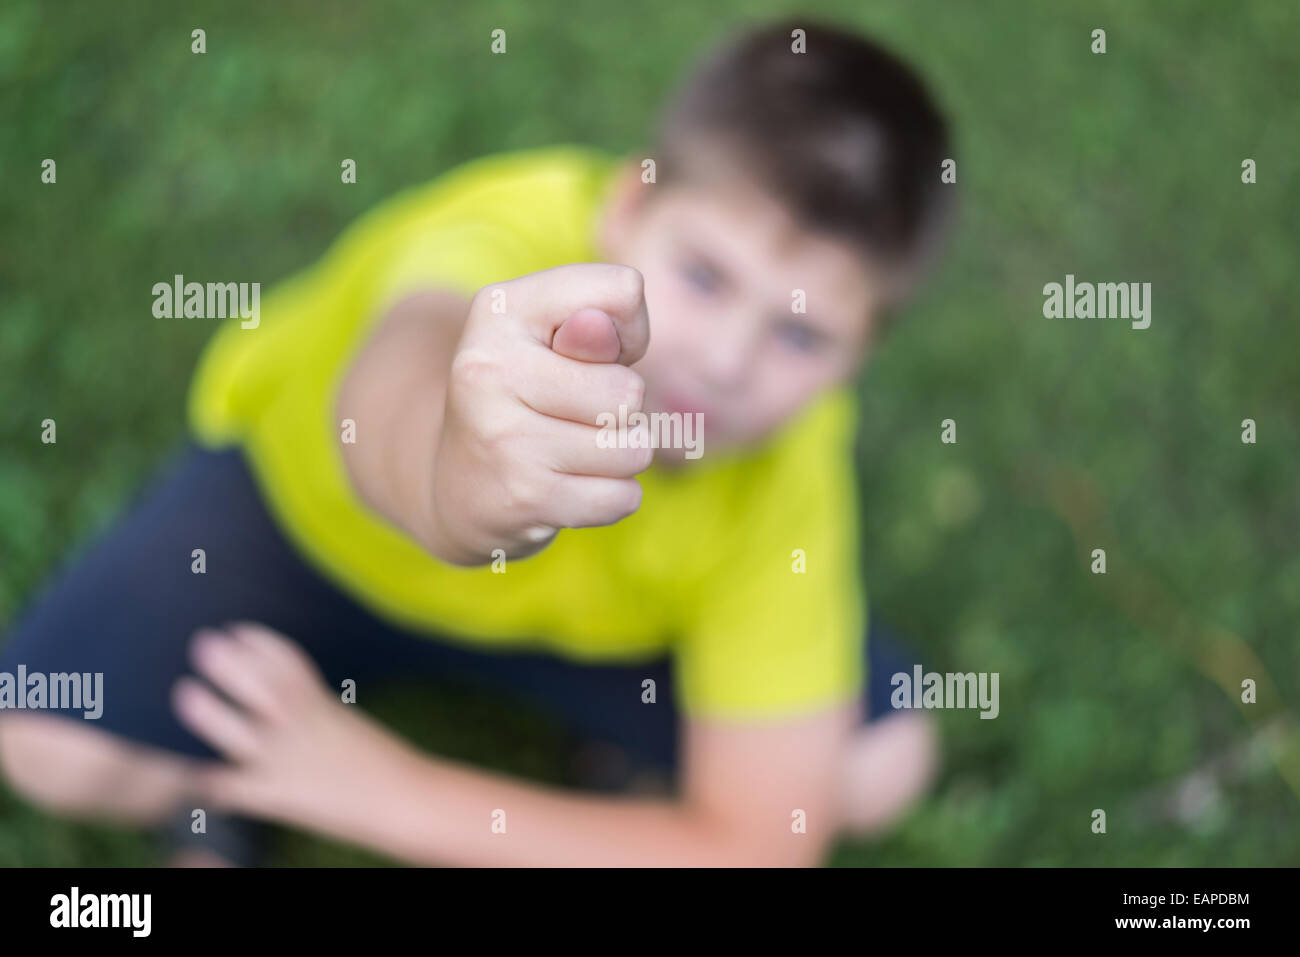 Teen boy shows the hand gesture Stock Photo